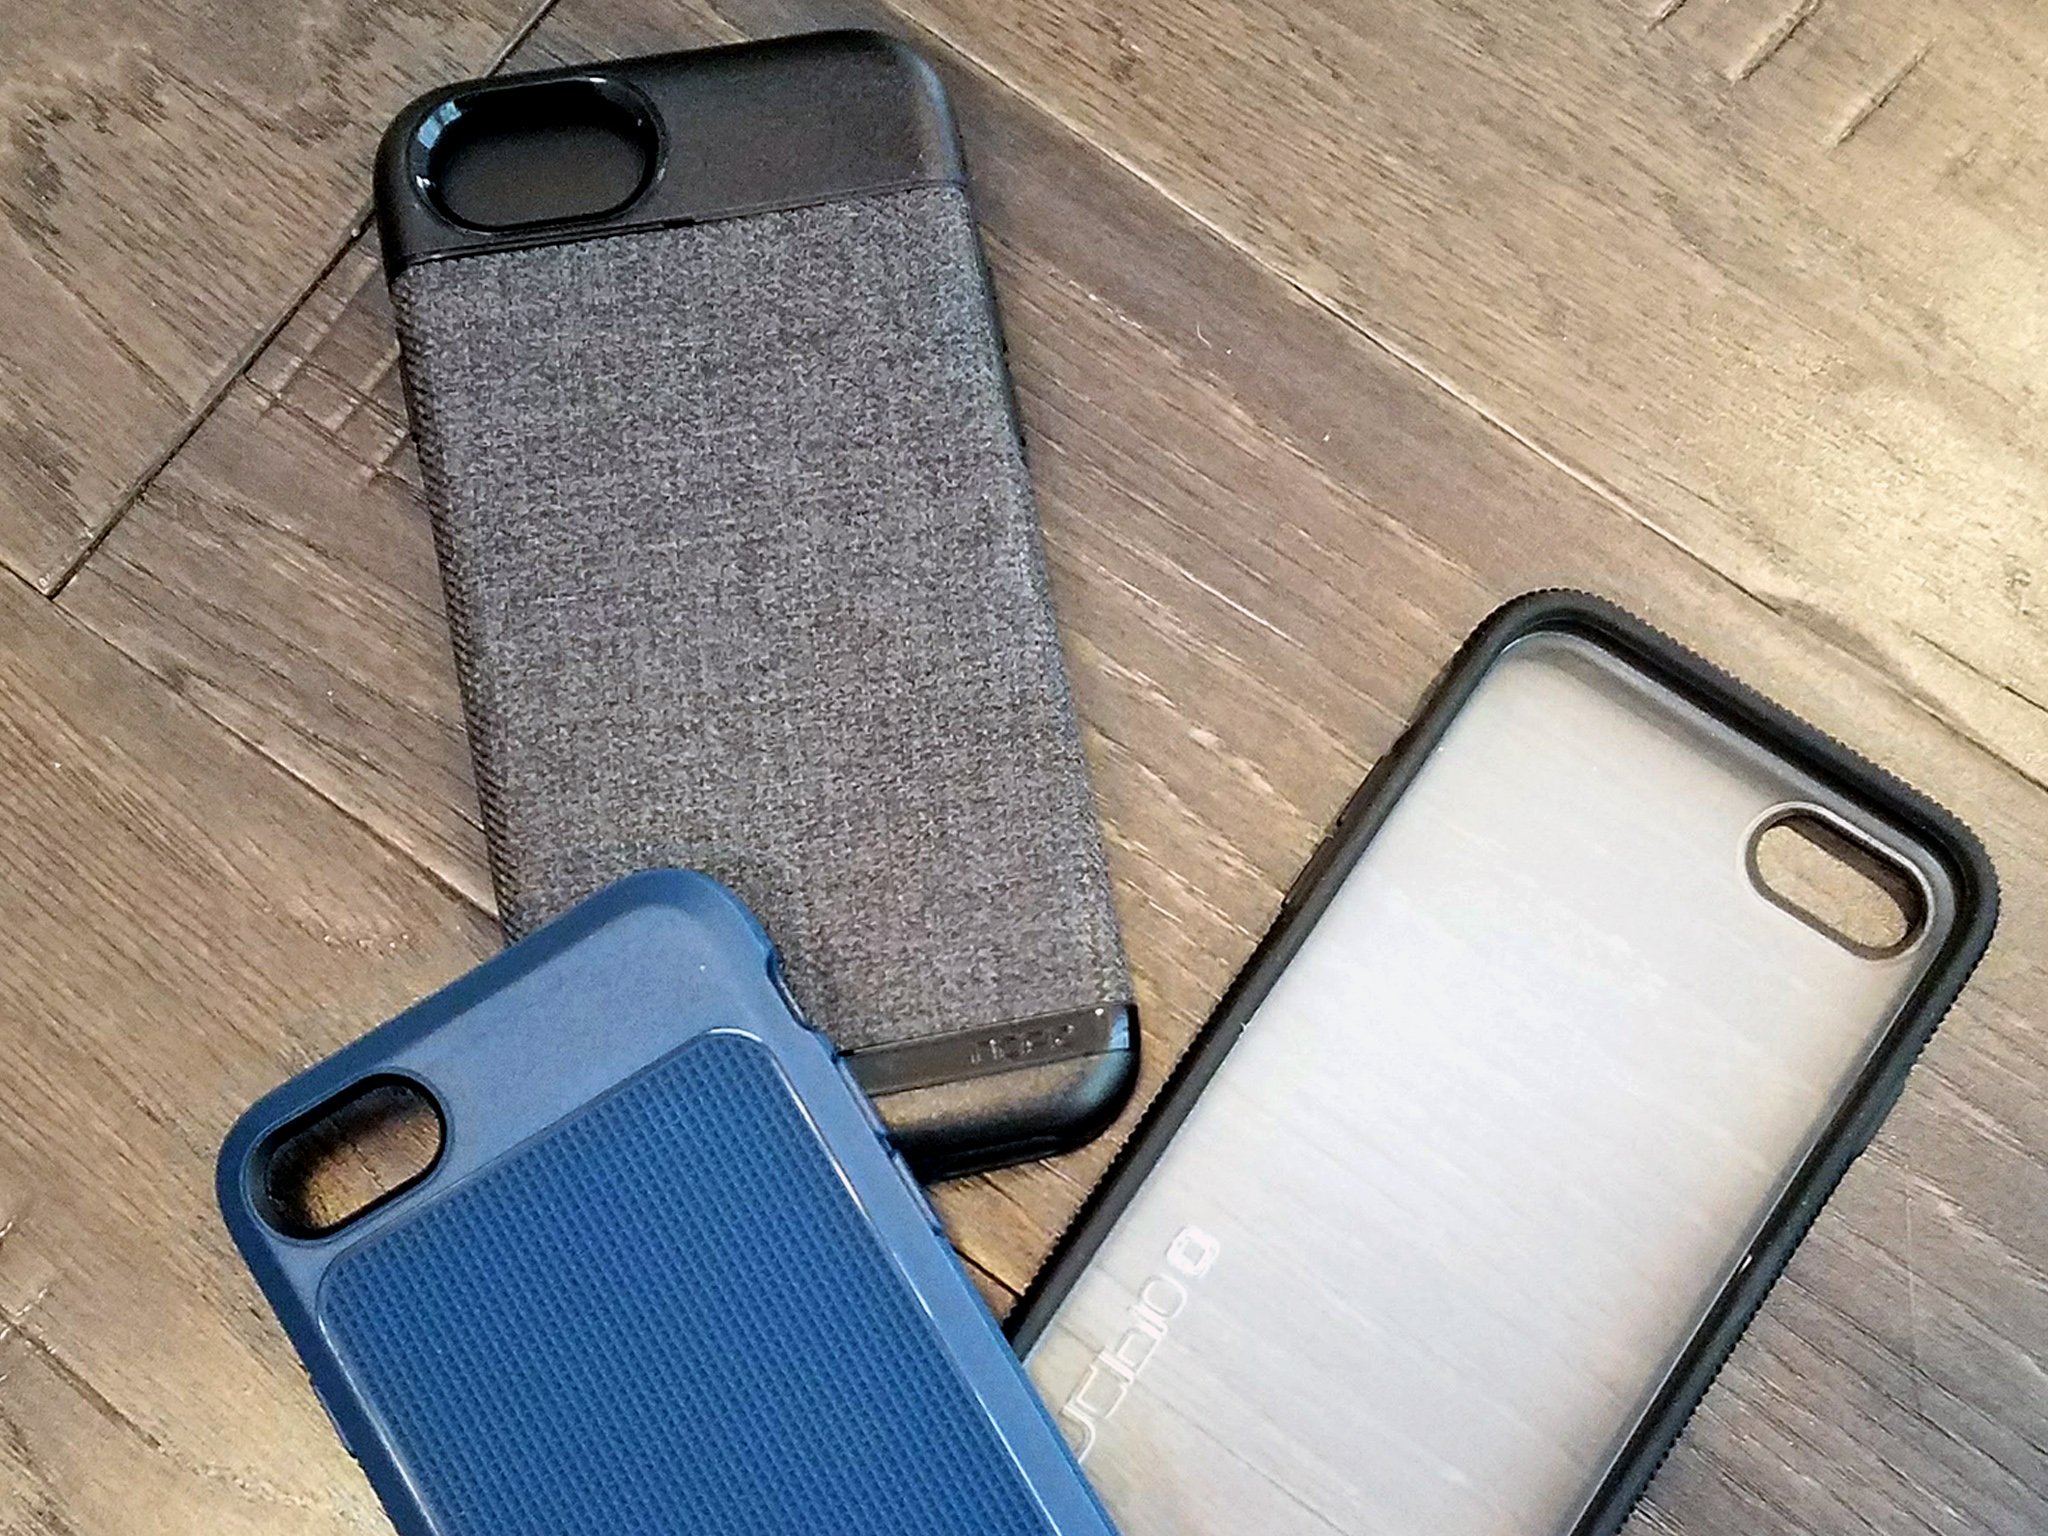 The Best iPhone 8 Cases